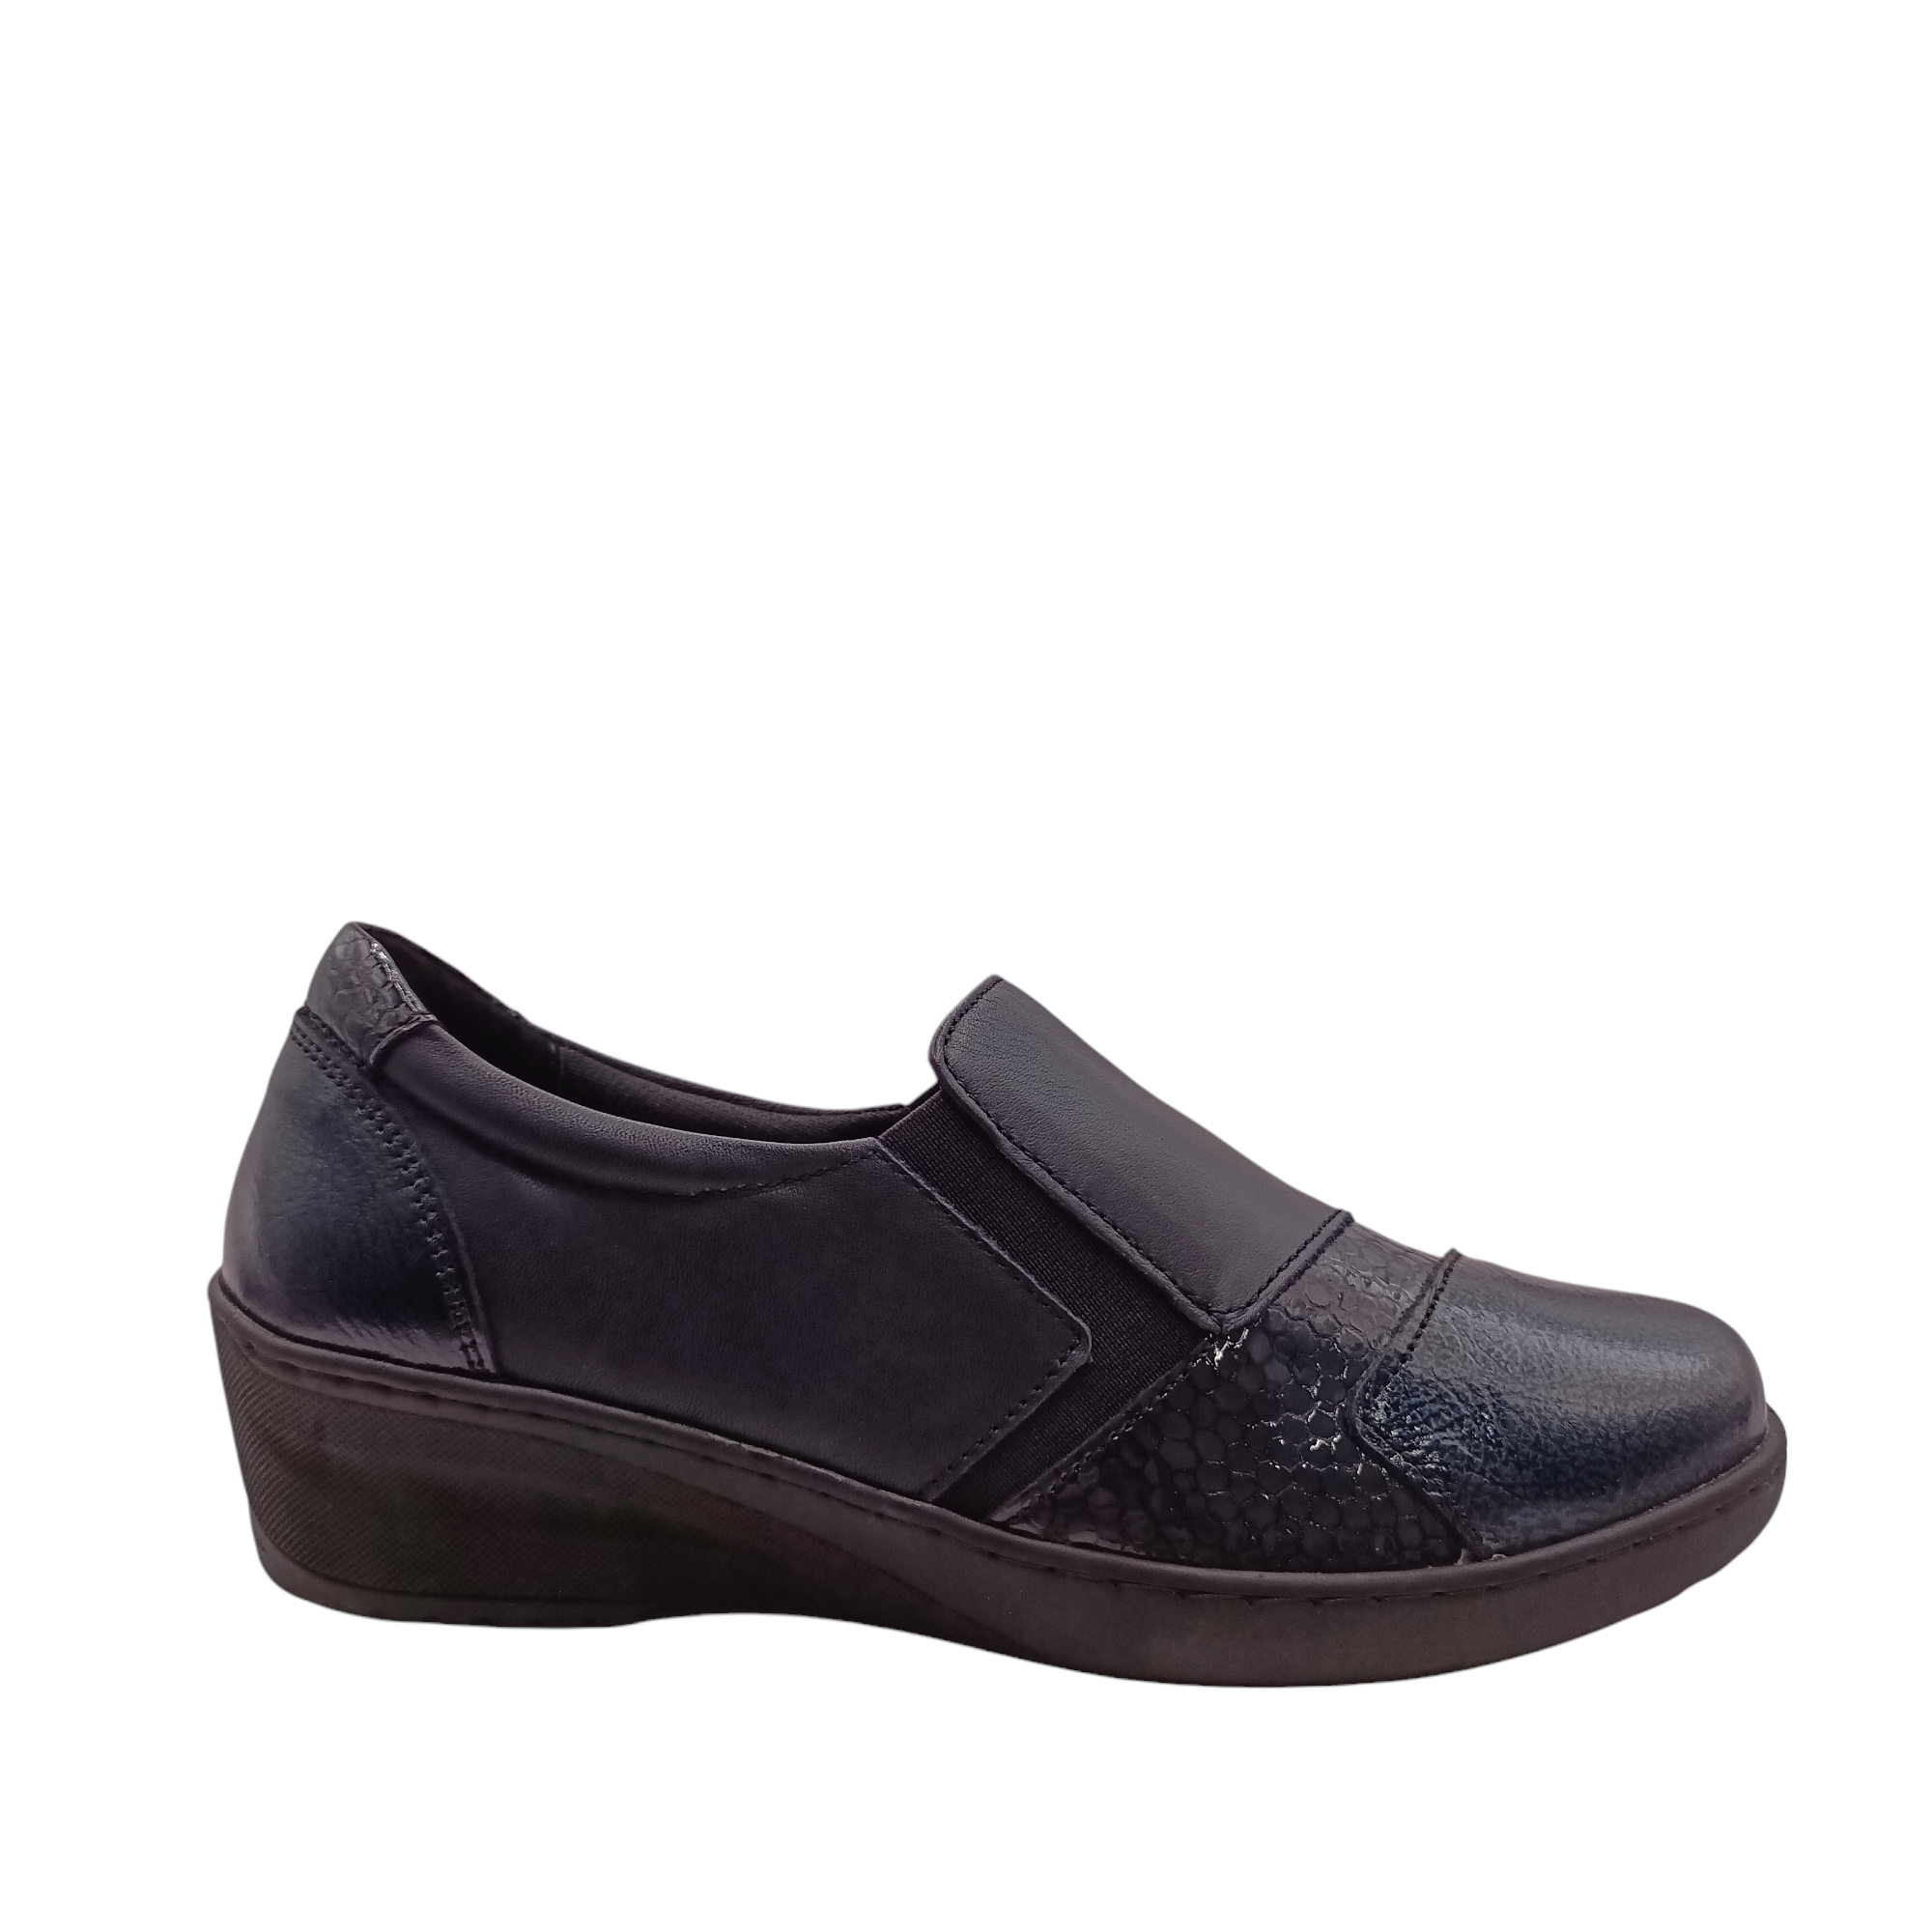 Shop CP461-18 Cabello - with shoe&amp;me - from Cabello - Shoes - Shoe, Winter, Womens - [collection]